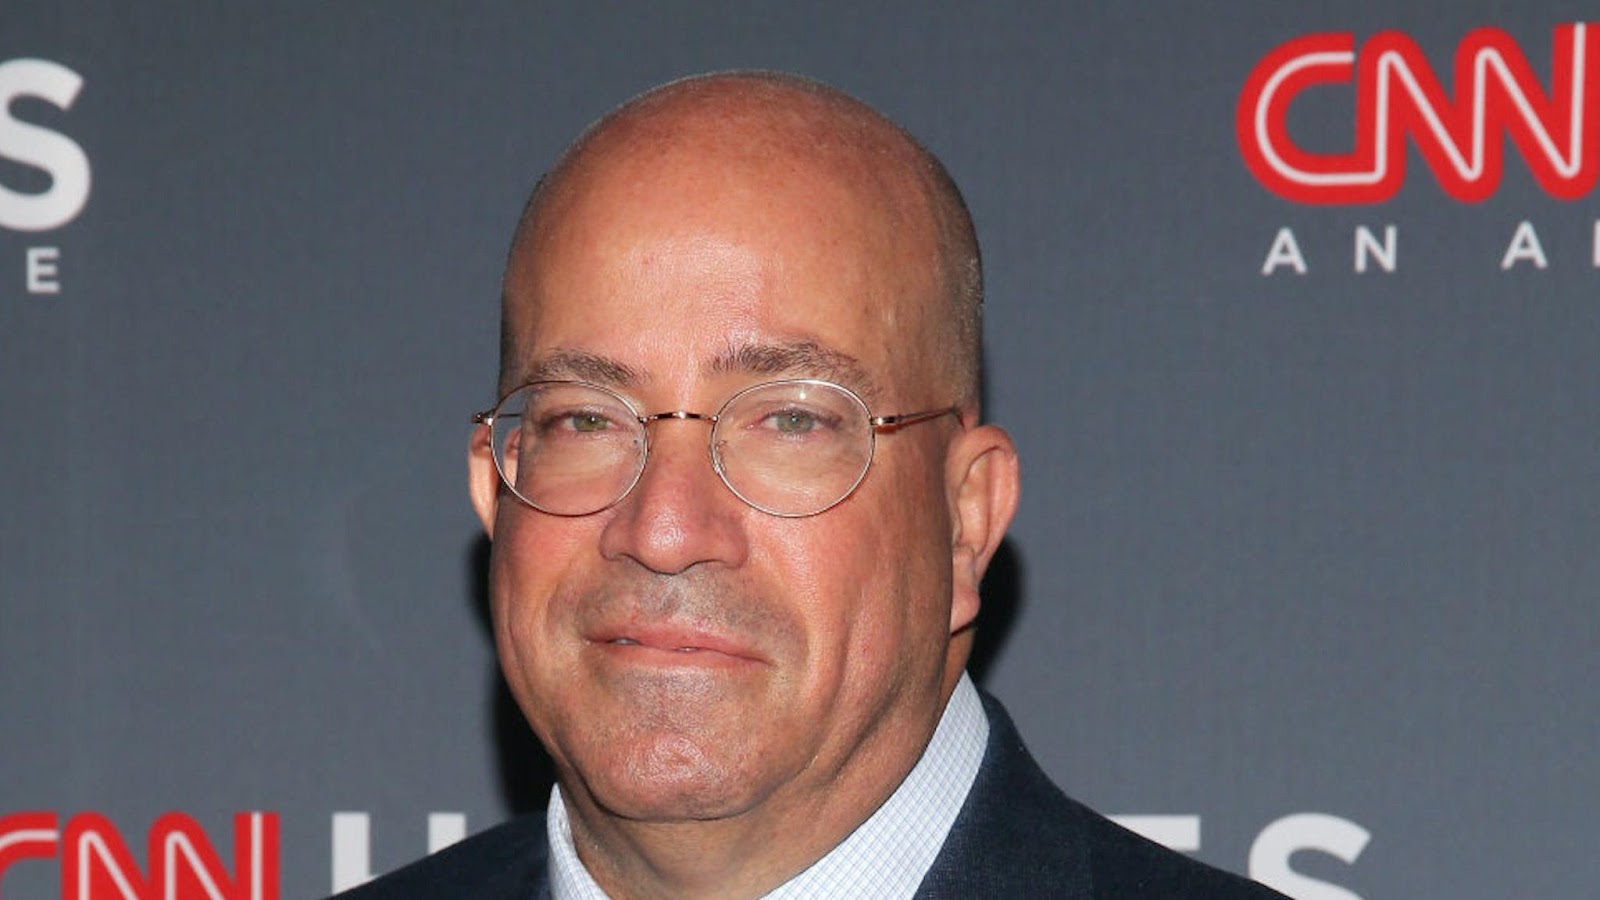 NEW YORK, NEW YORK - DECEMBER 08: Jeff Zucker attends the 13th Annual CNN Heroes at the American Museum of Natural History on December 08, 2019 in New York City.